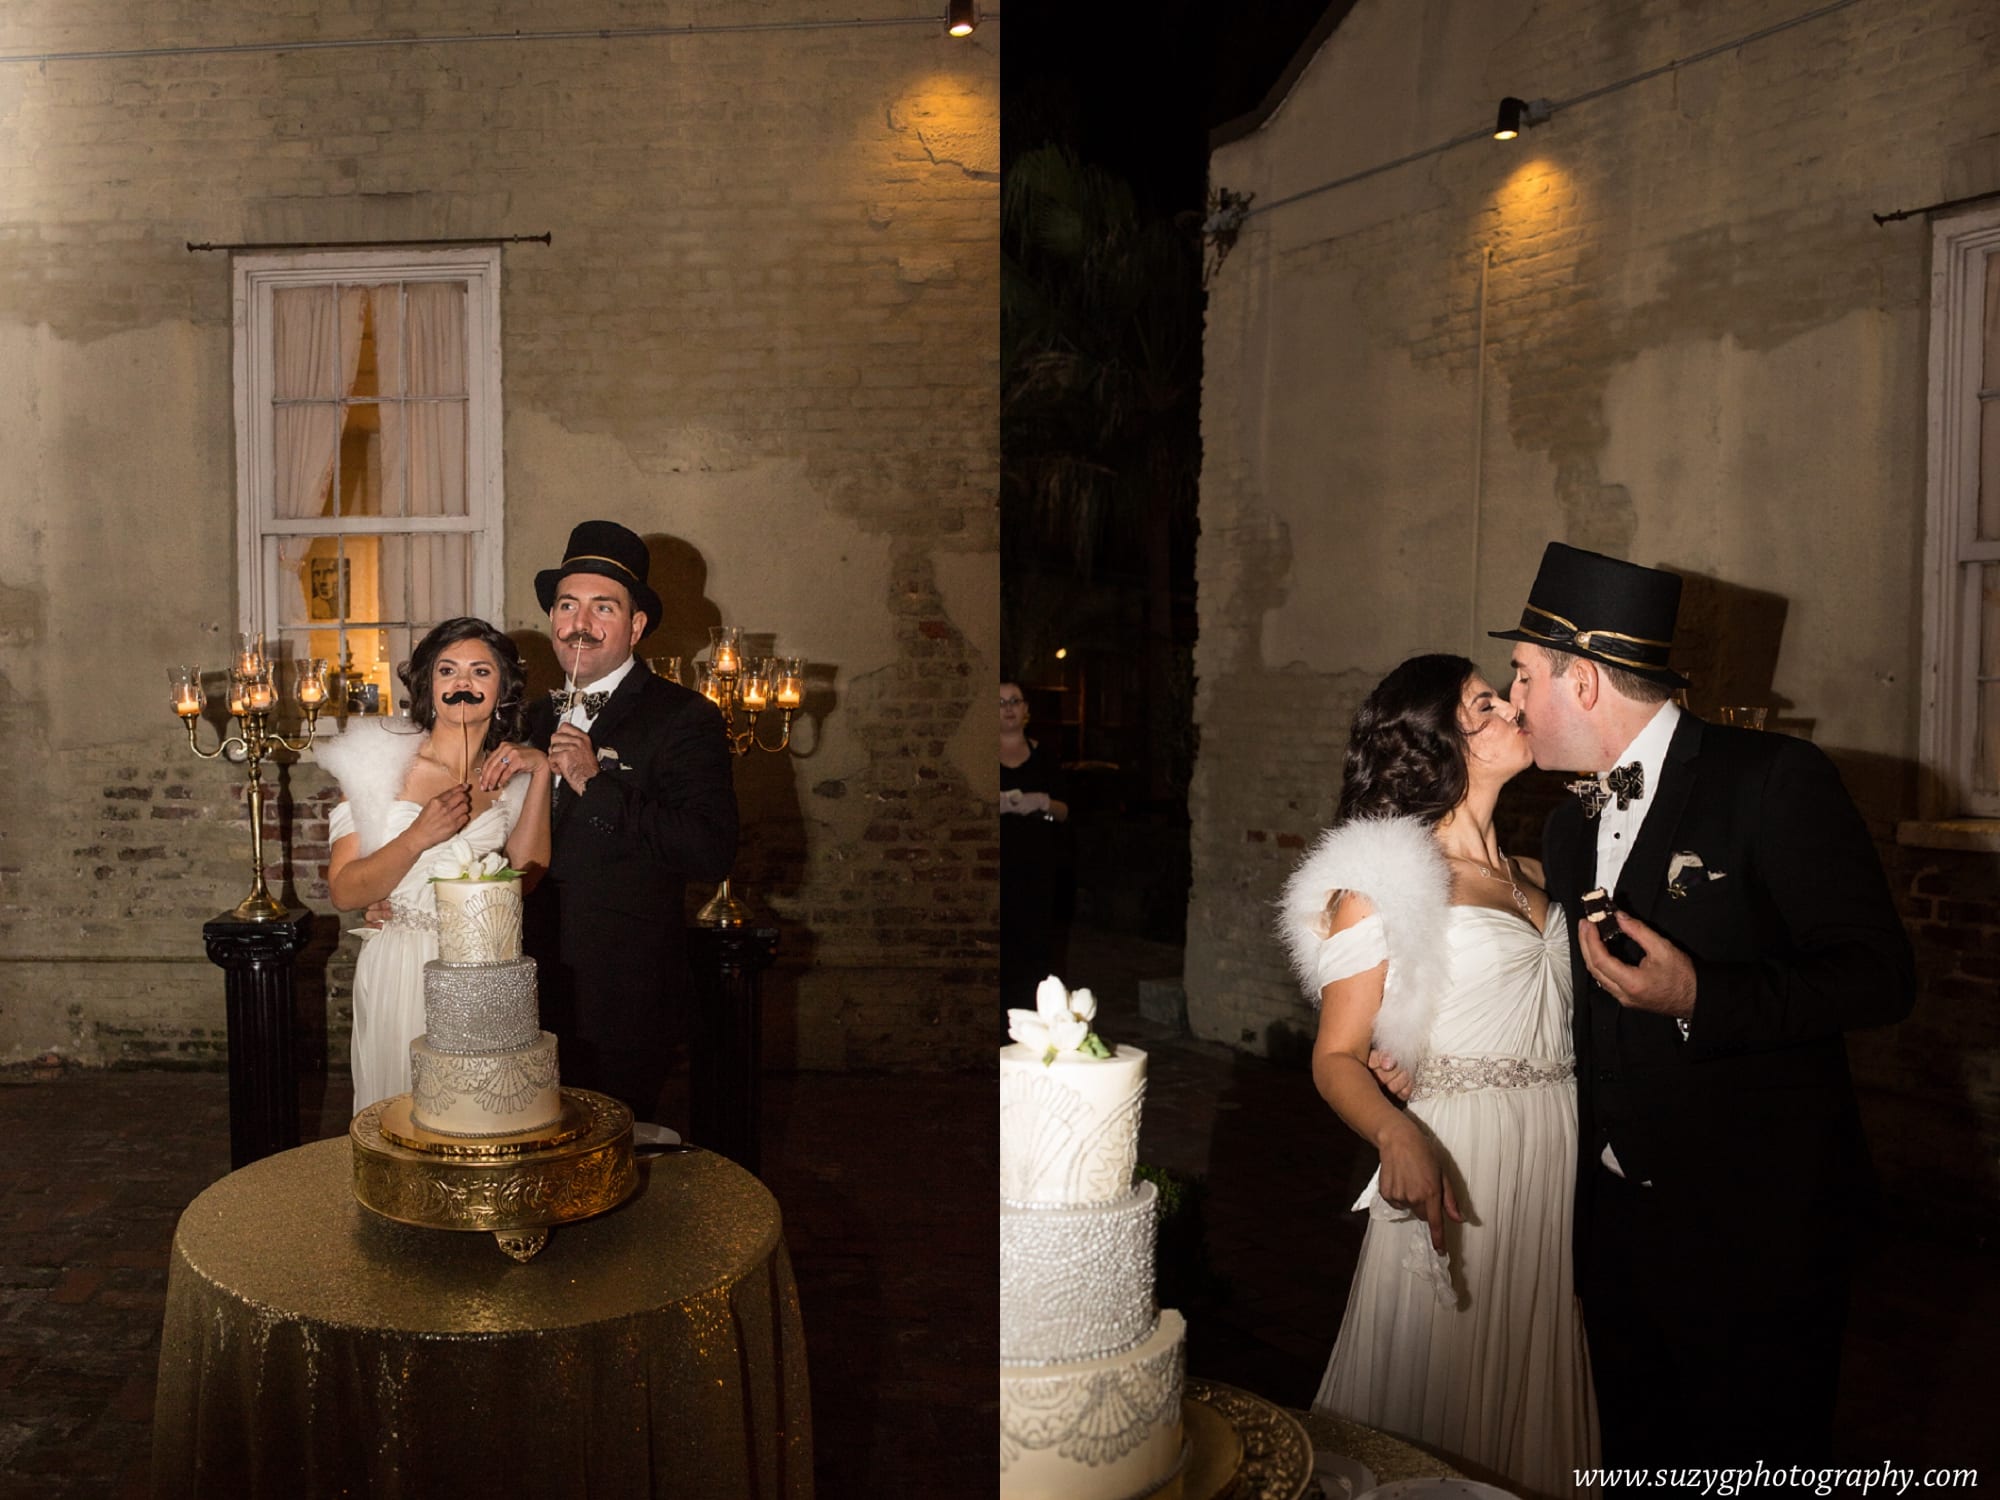 race and religious-new orleans wedding-nola-suzyg-suzy-g-photography-weddings-wedding photography_0056